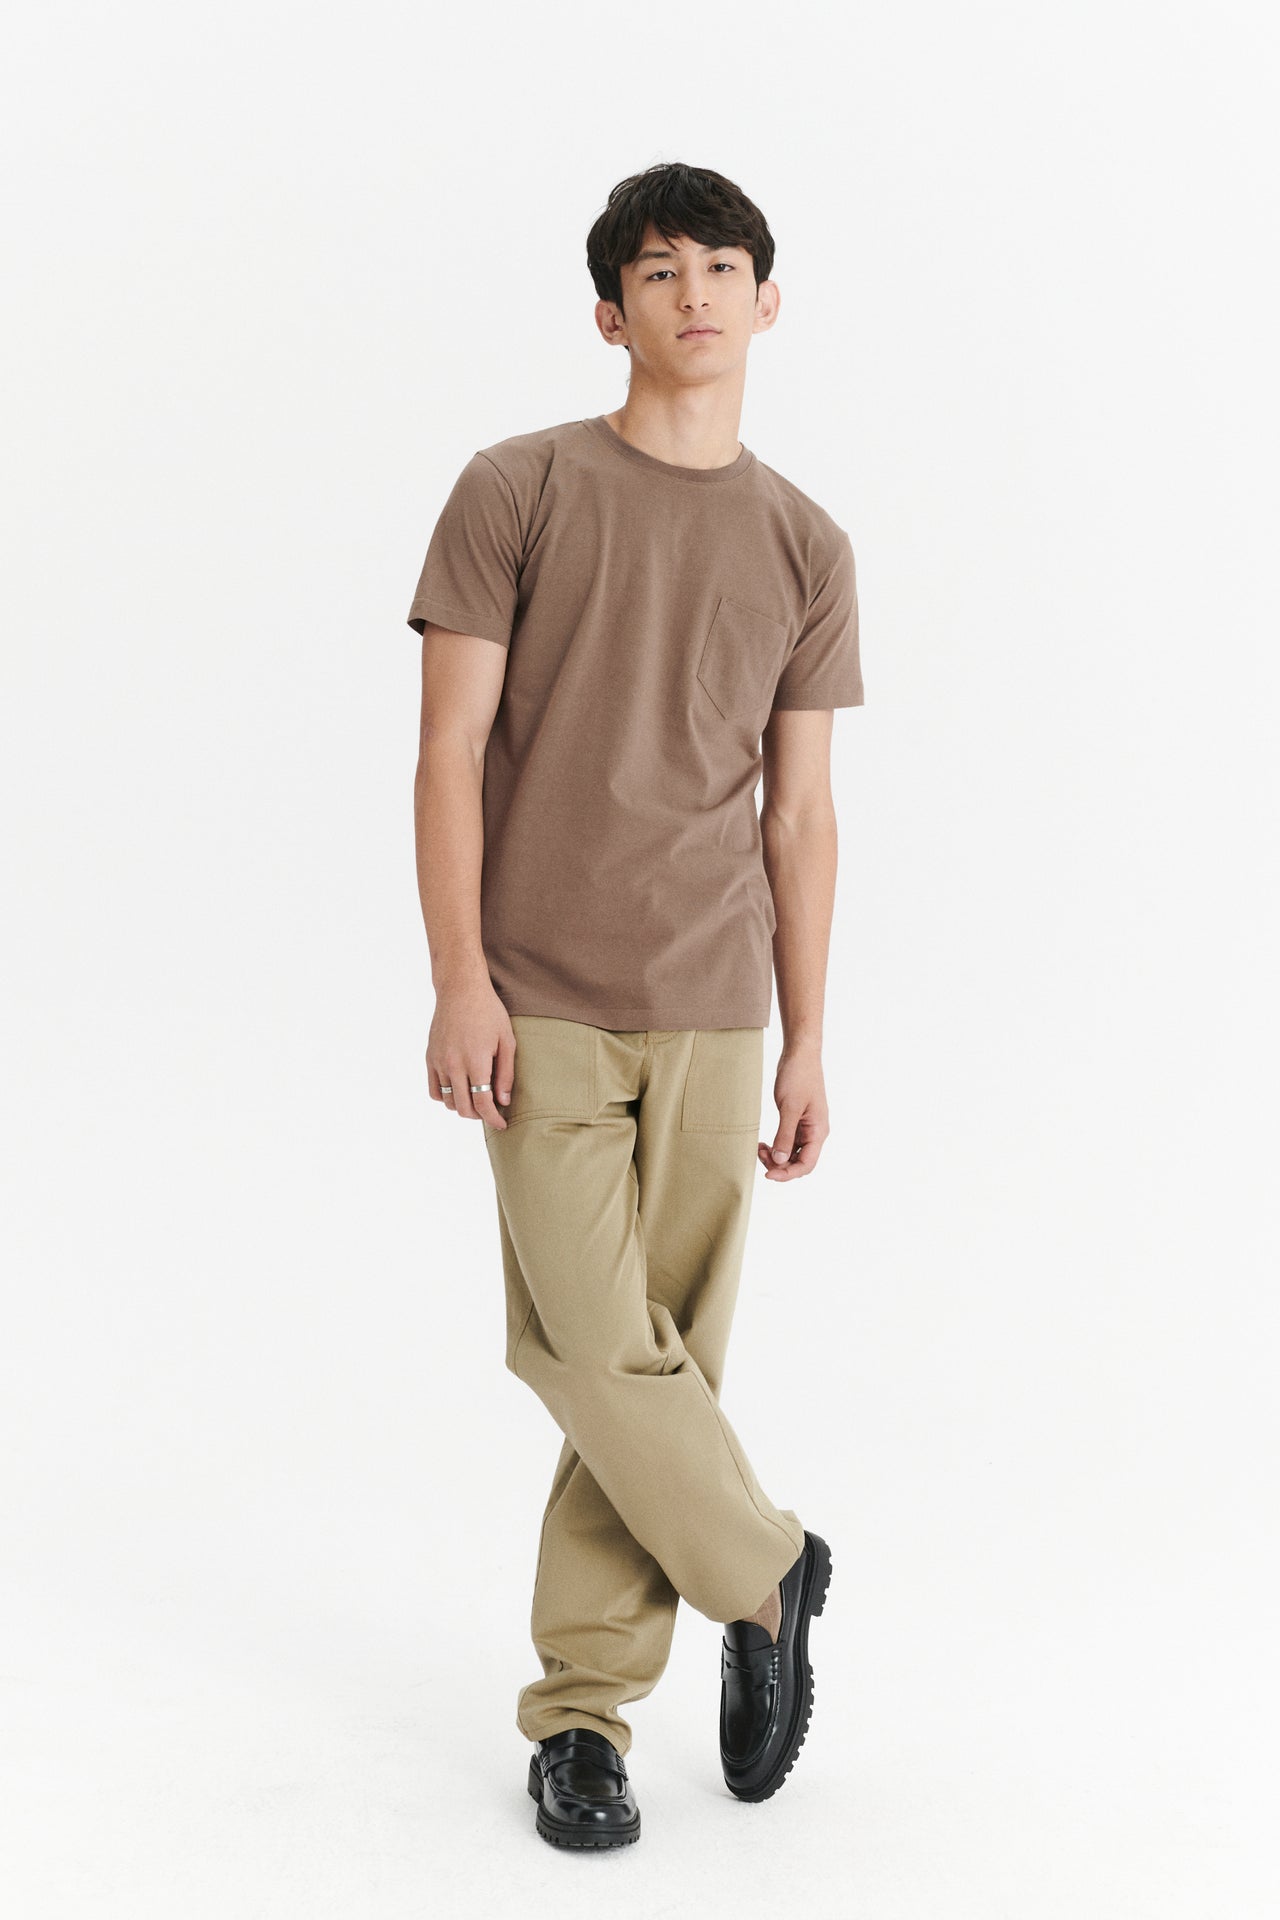 Pocket T-Shirt in a Taupe Shady Brown Japanese Soft Organic Cotton Jersey